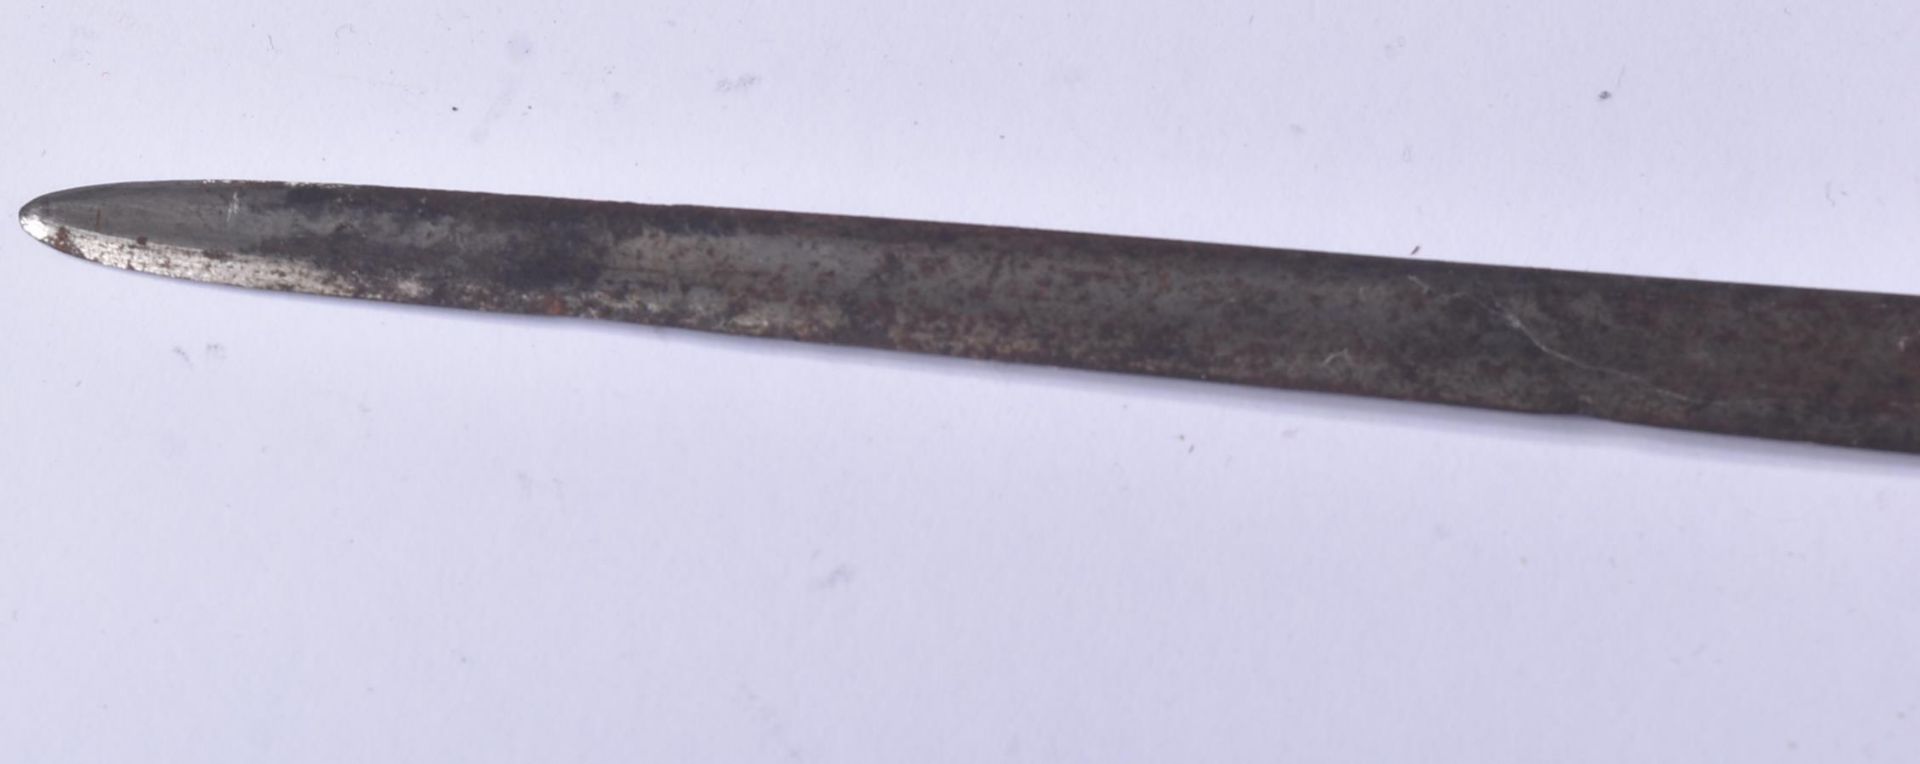 EARLY 19TH CENTURY INFANTRY OFFICERS SWORD / SPADROON - Image 9 of 16